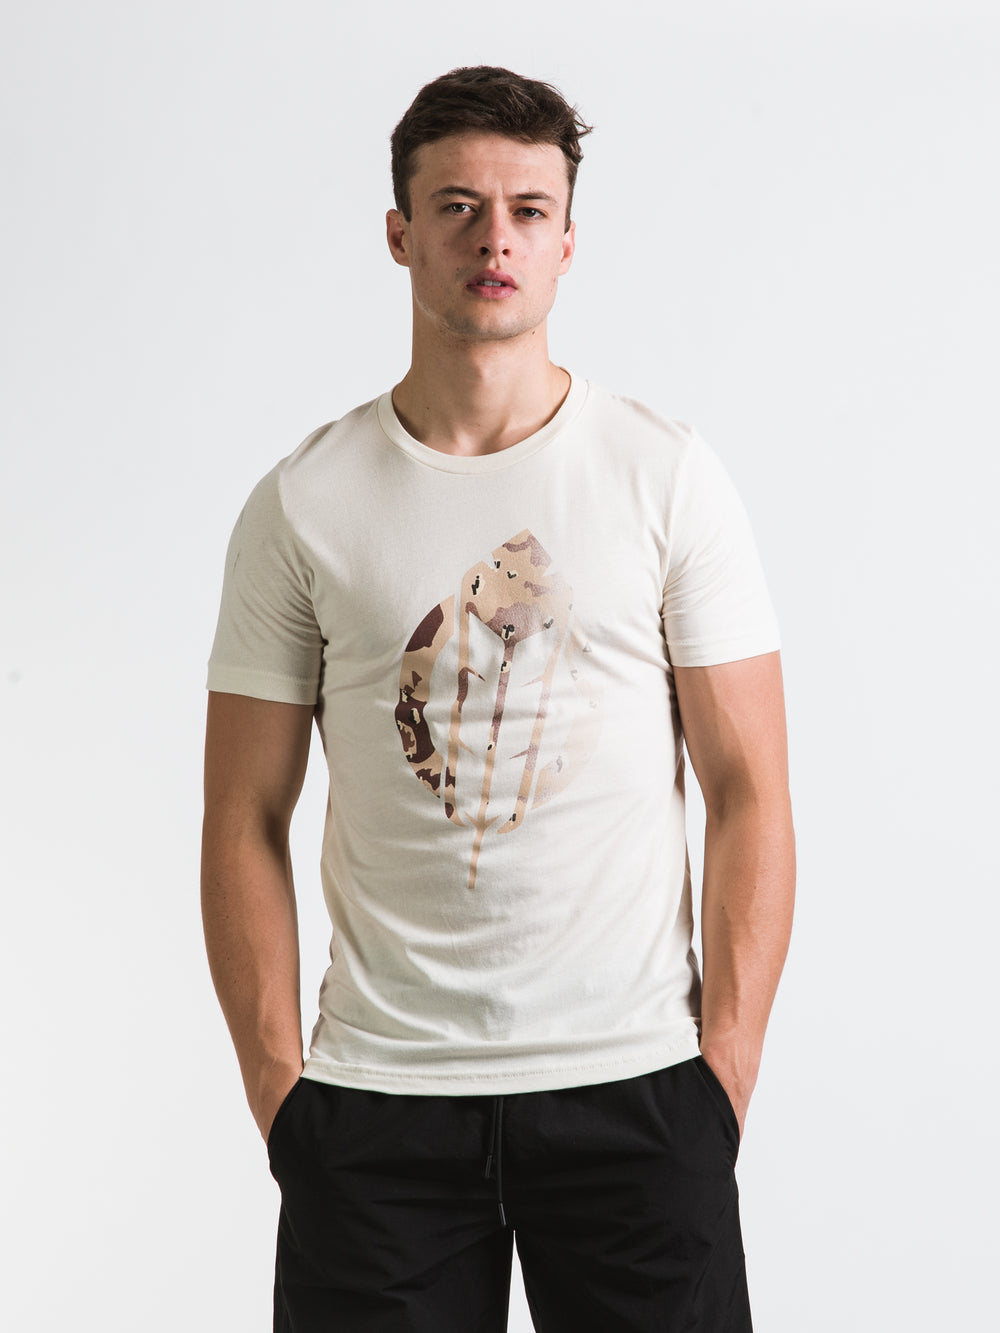 SECTION 35 DESERT CAMO TALKING FEATHER T-SHIRT - CLEARANCE